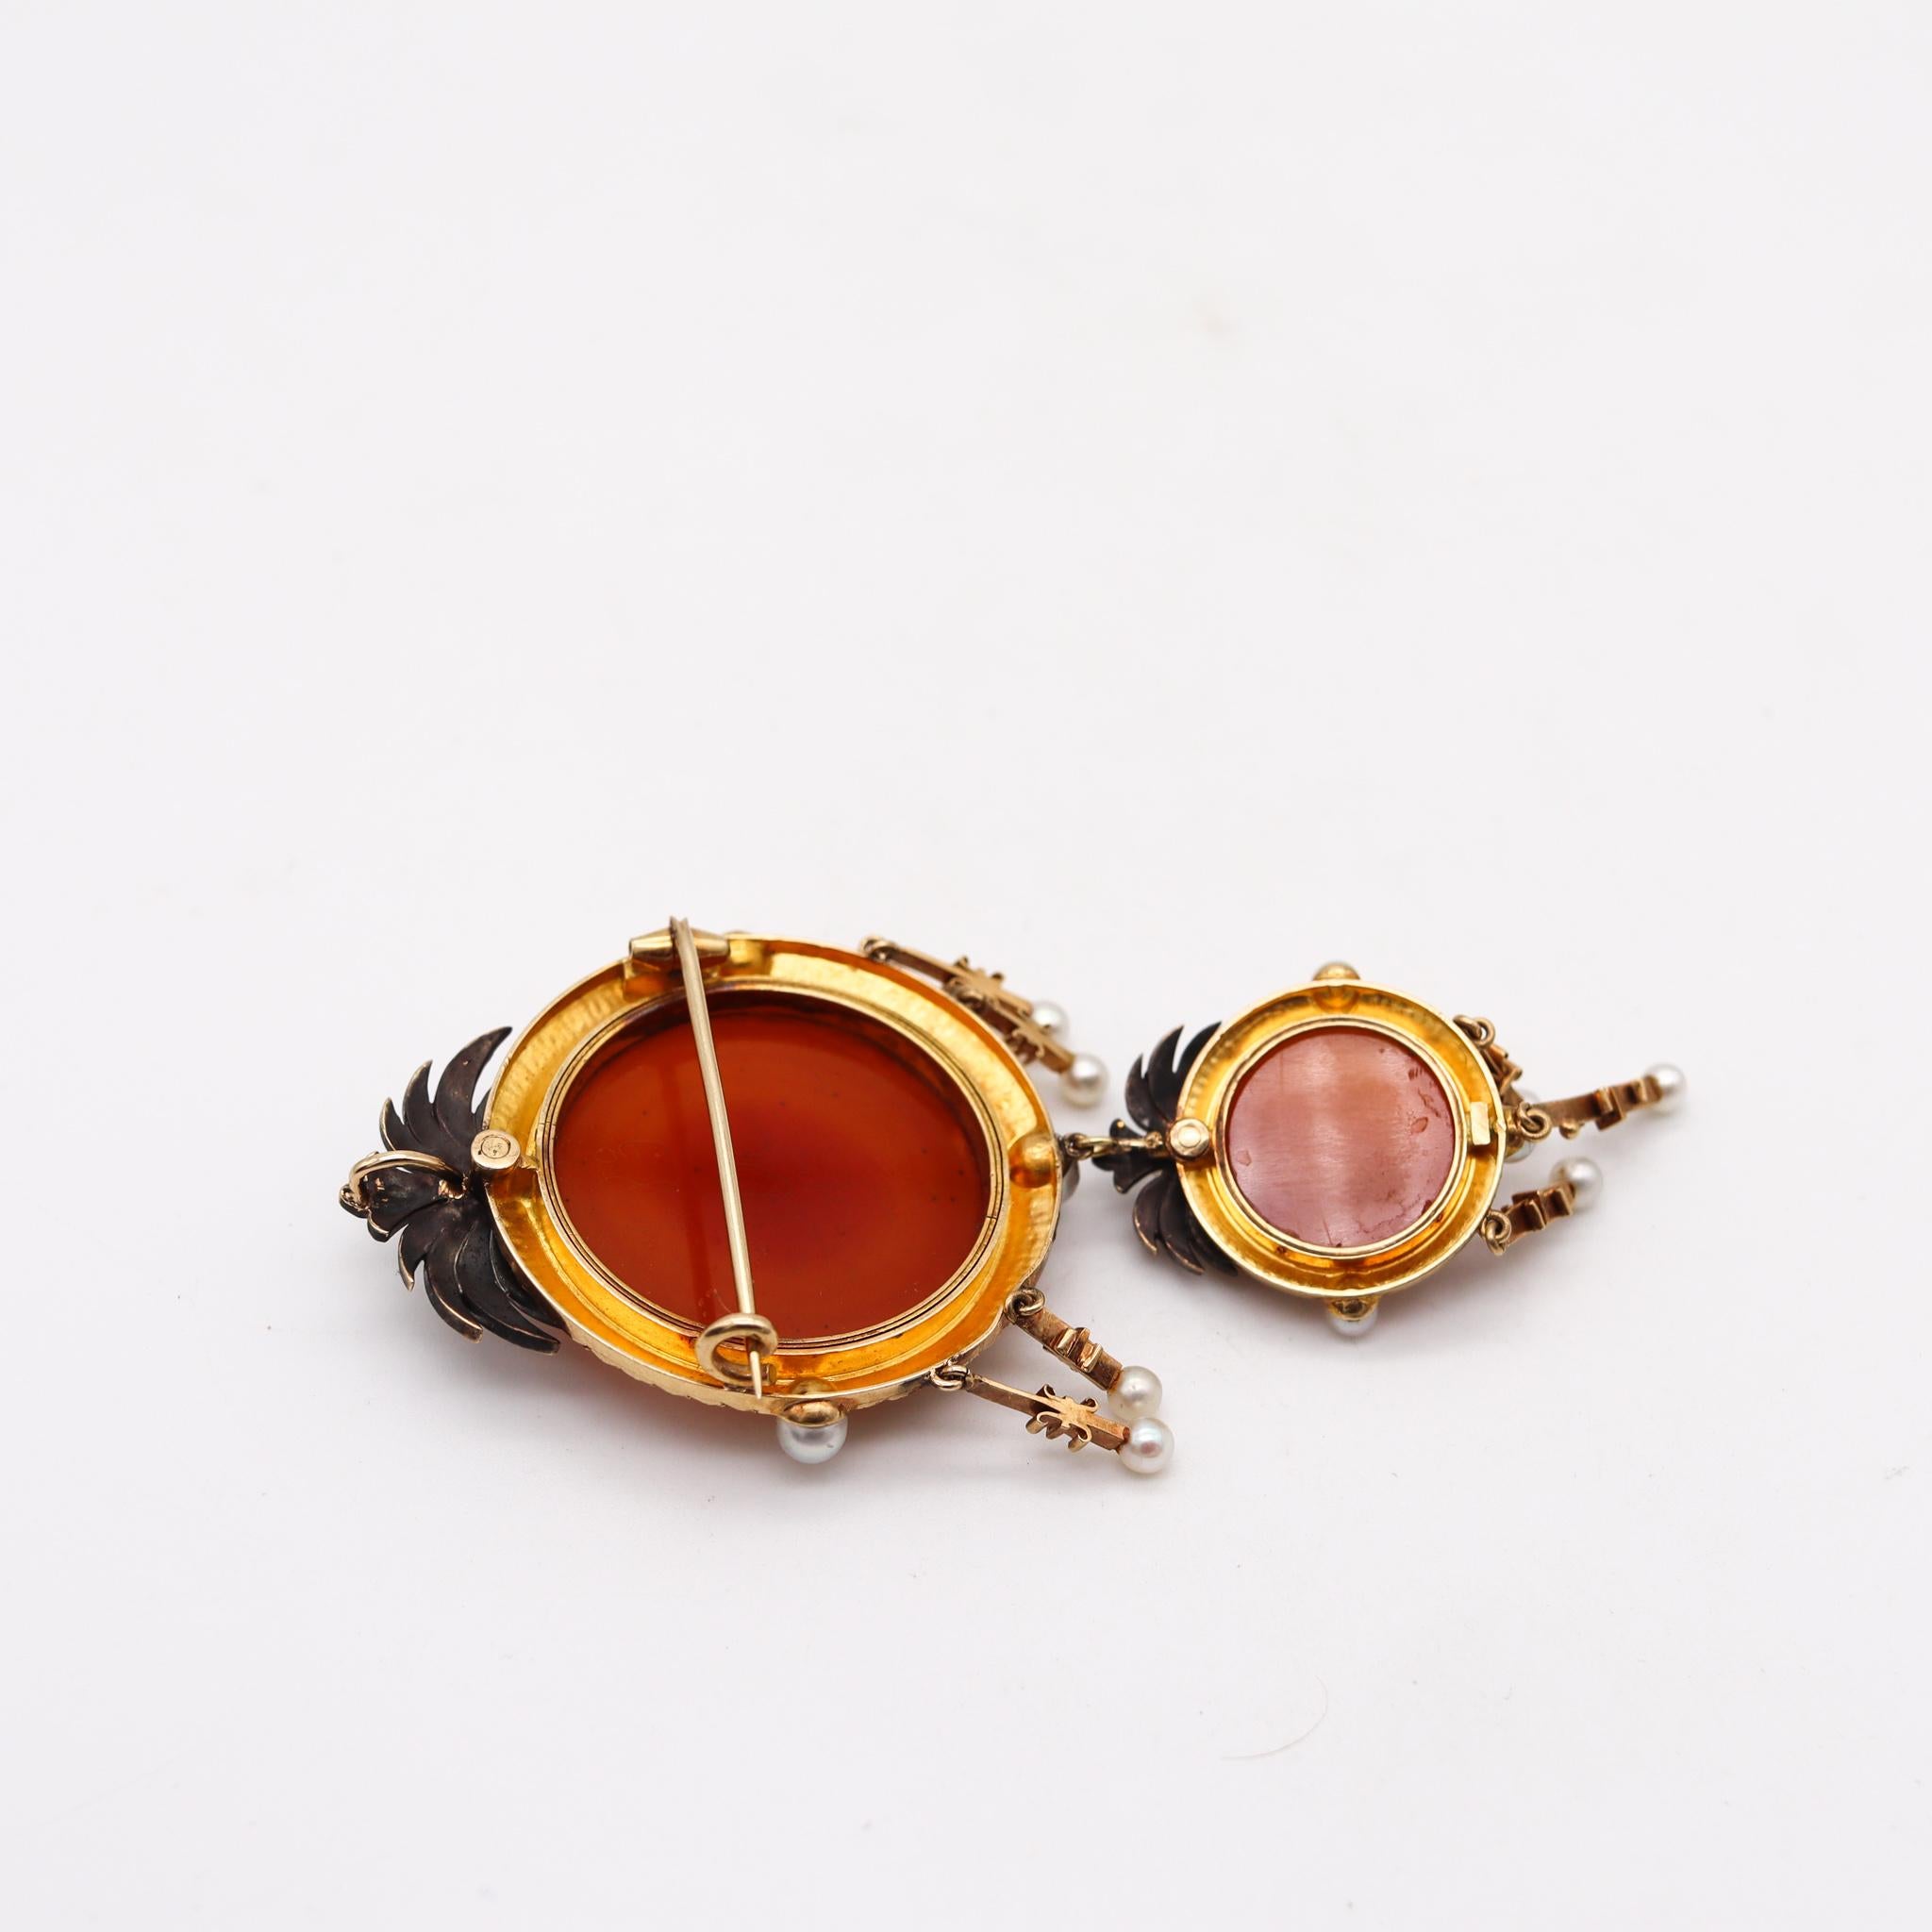 Rose Cut Austria 1870 Vienna Carved Agate Pendant Brooch in 18kt Gold with Natural Pearls For Sale